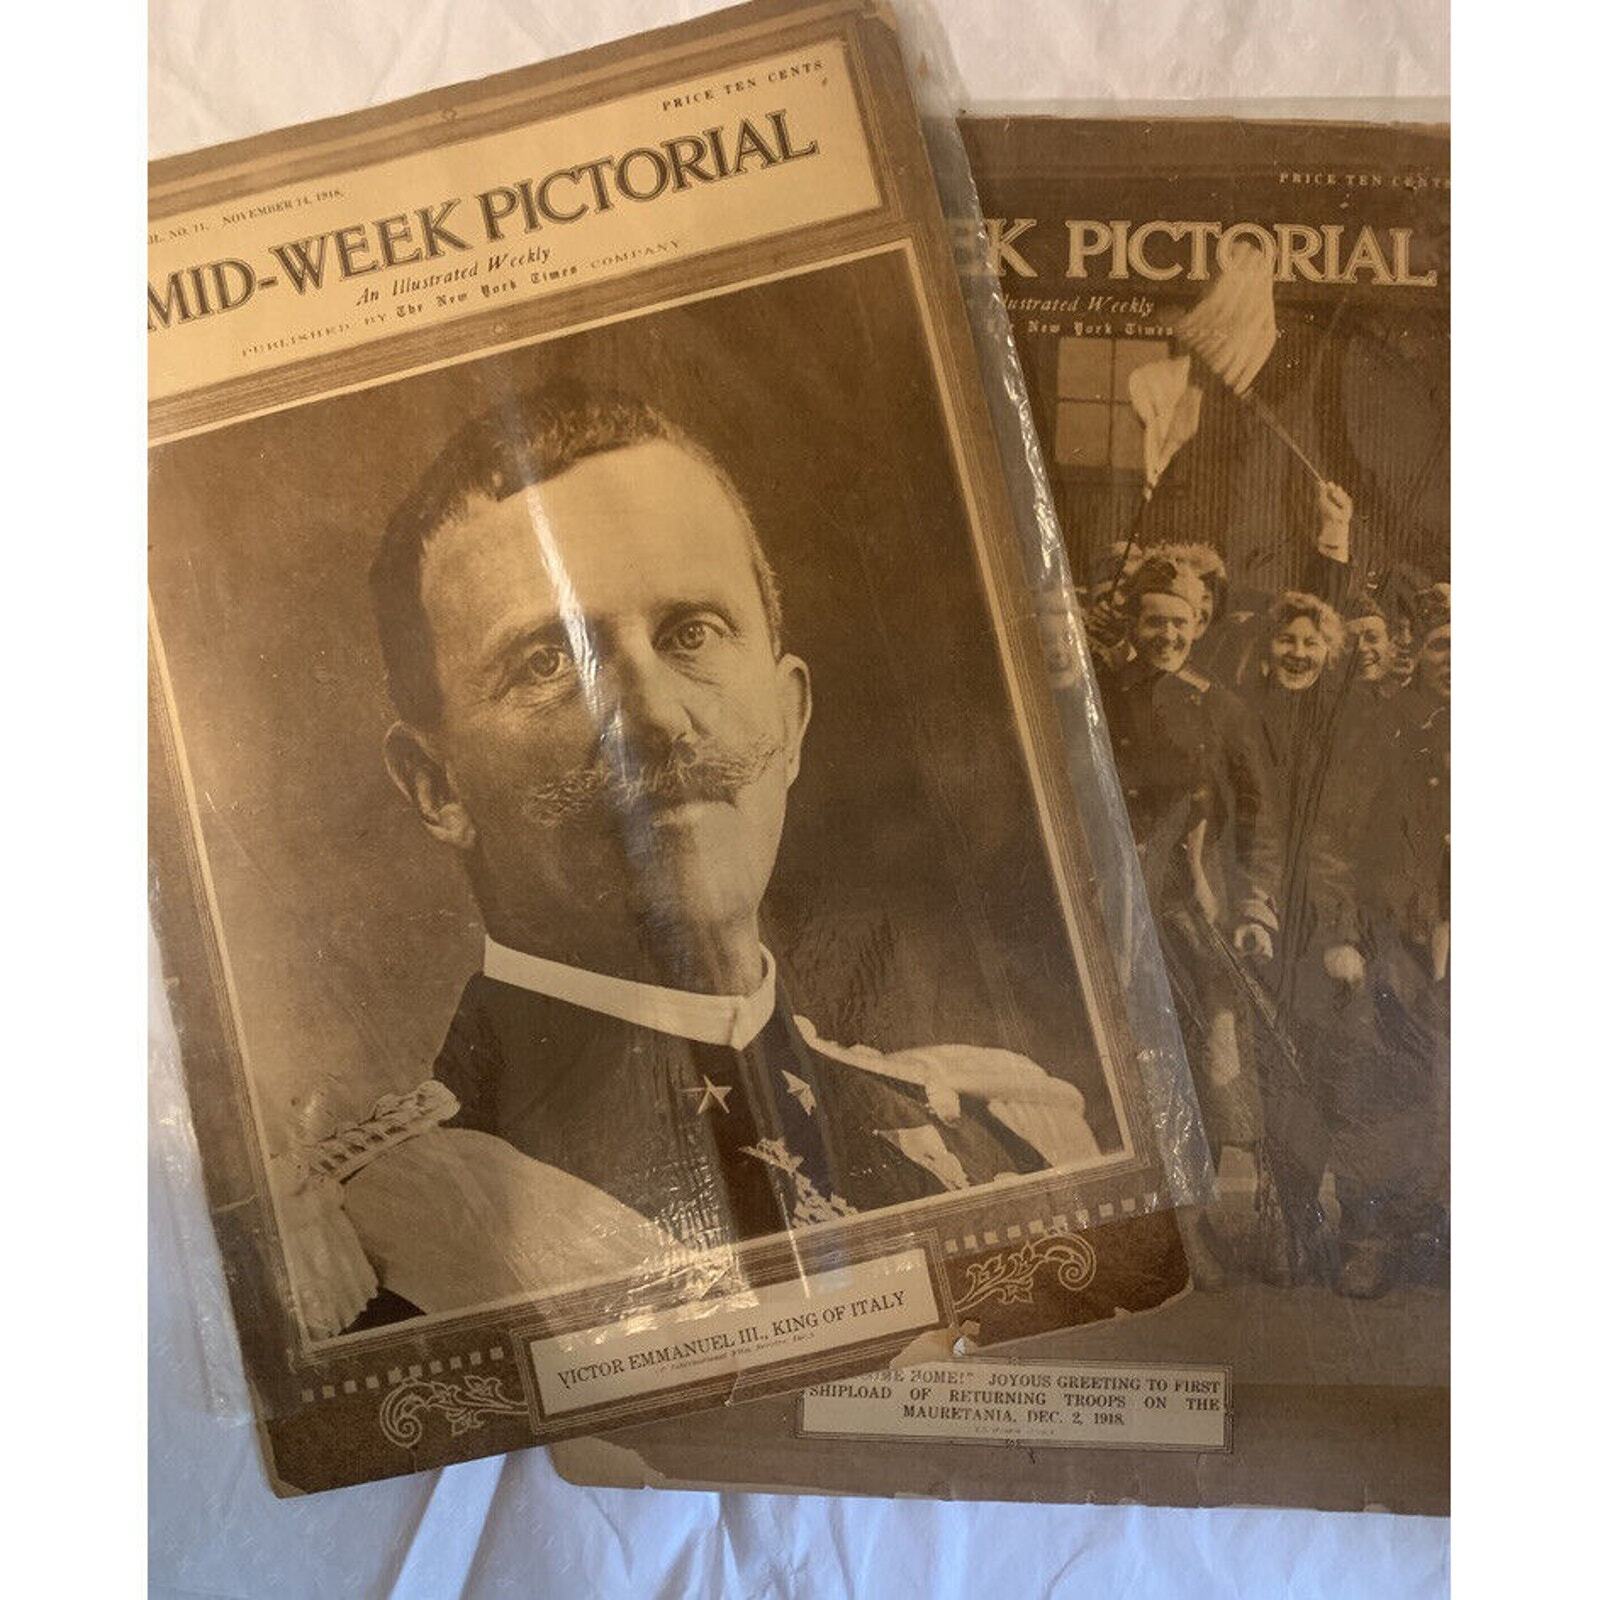 1918 Mid Week Pictorial An Illustrated Weekly by the New York Times (Lot of 2)